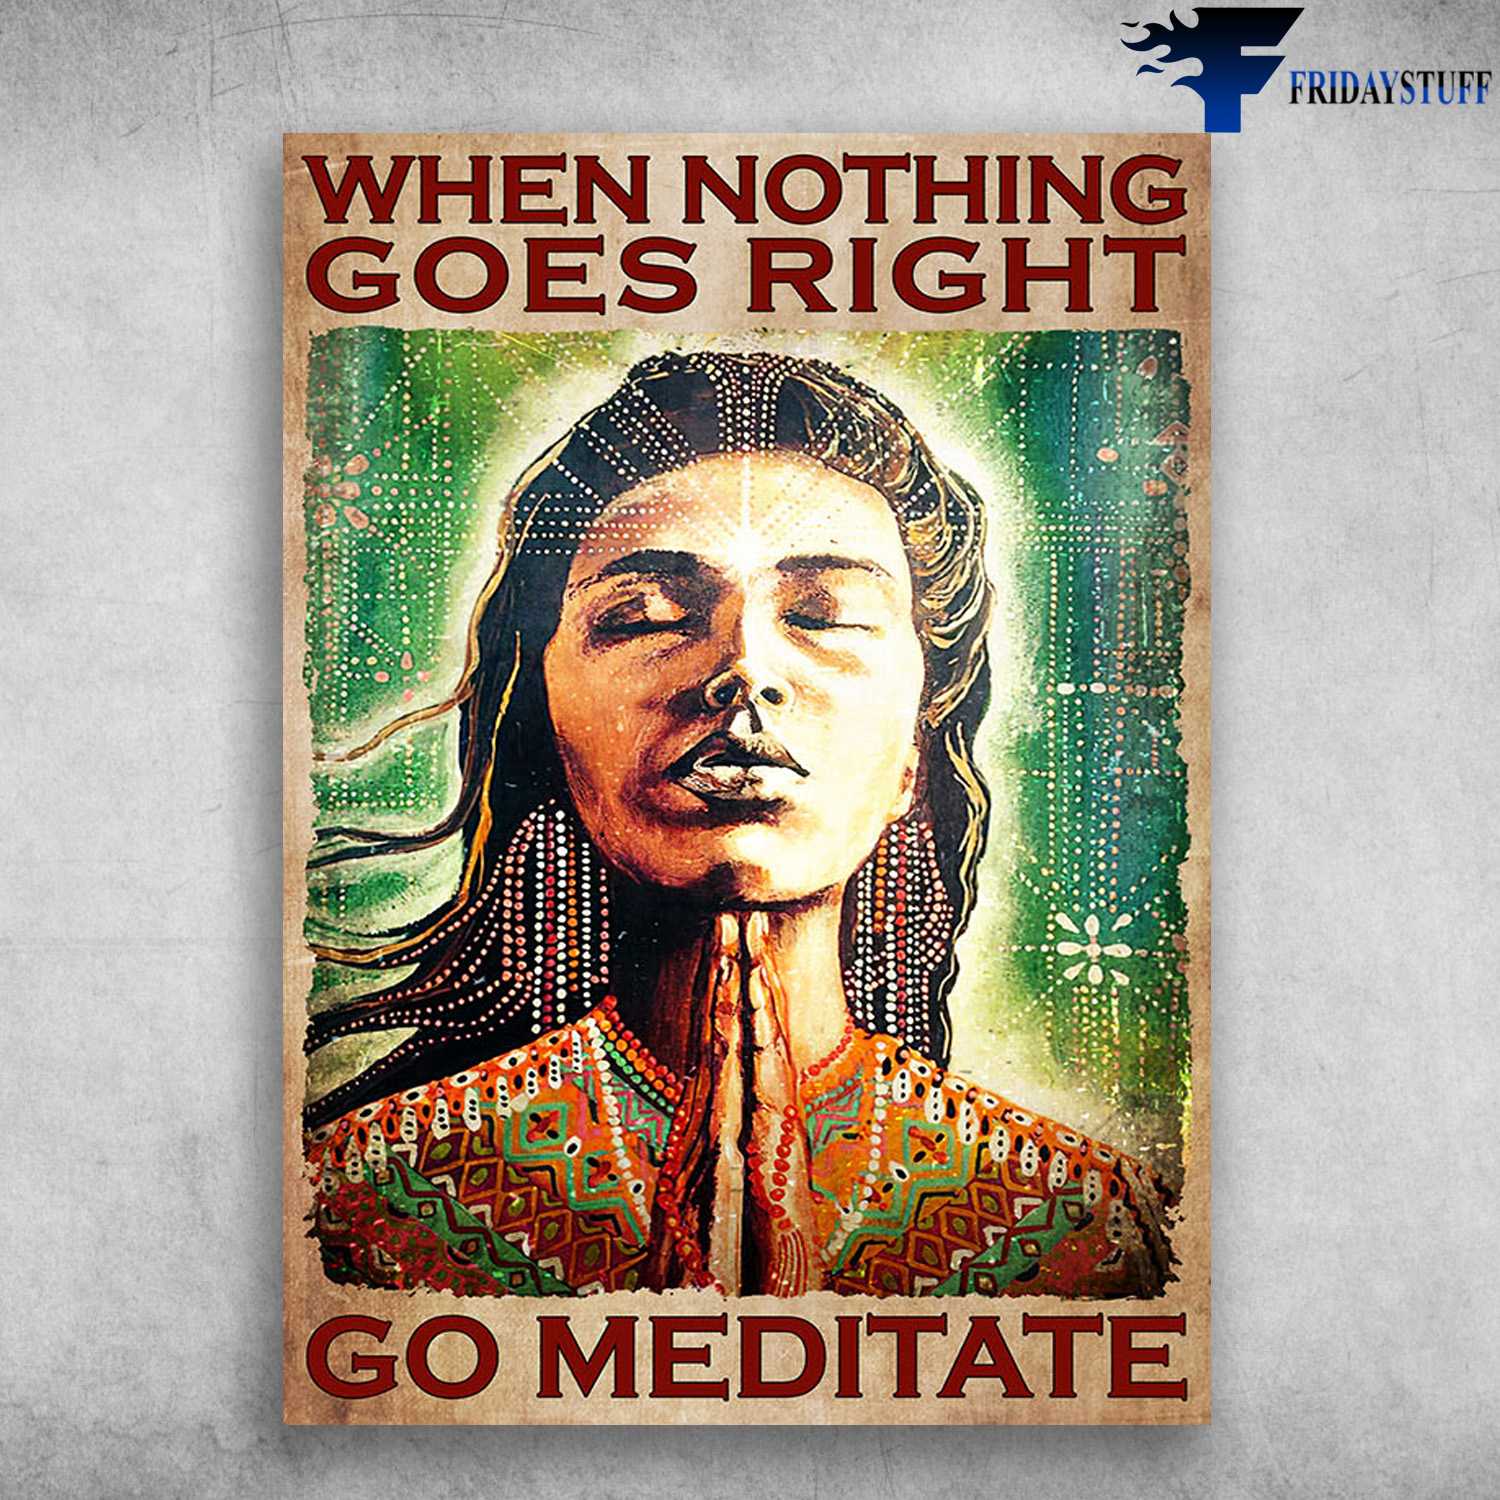 Woman Meditating - When Nothing Goes Right, Go Meditate